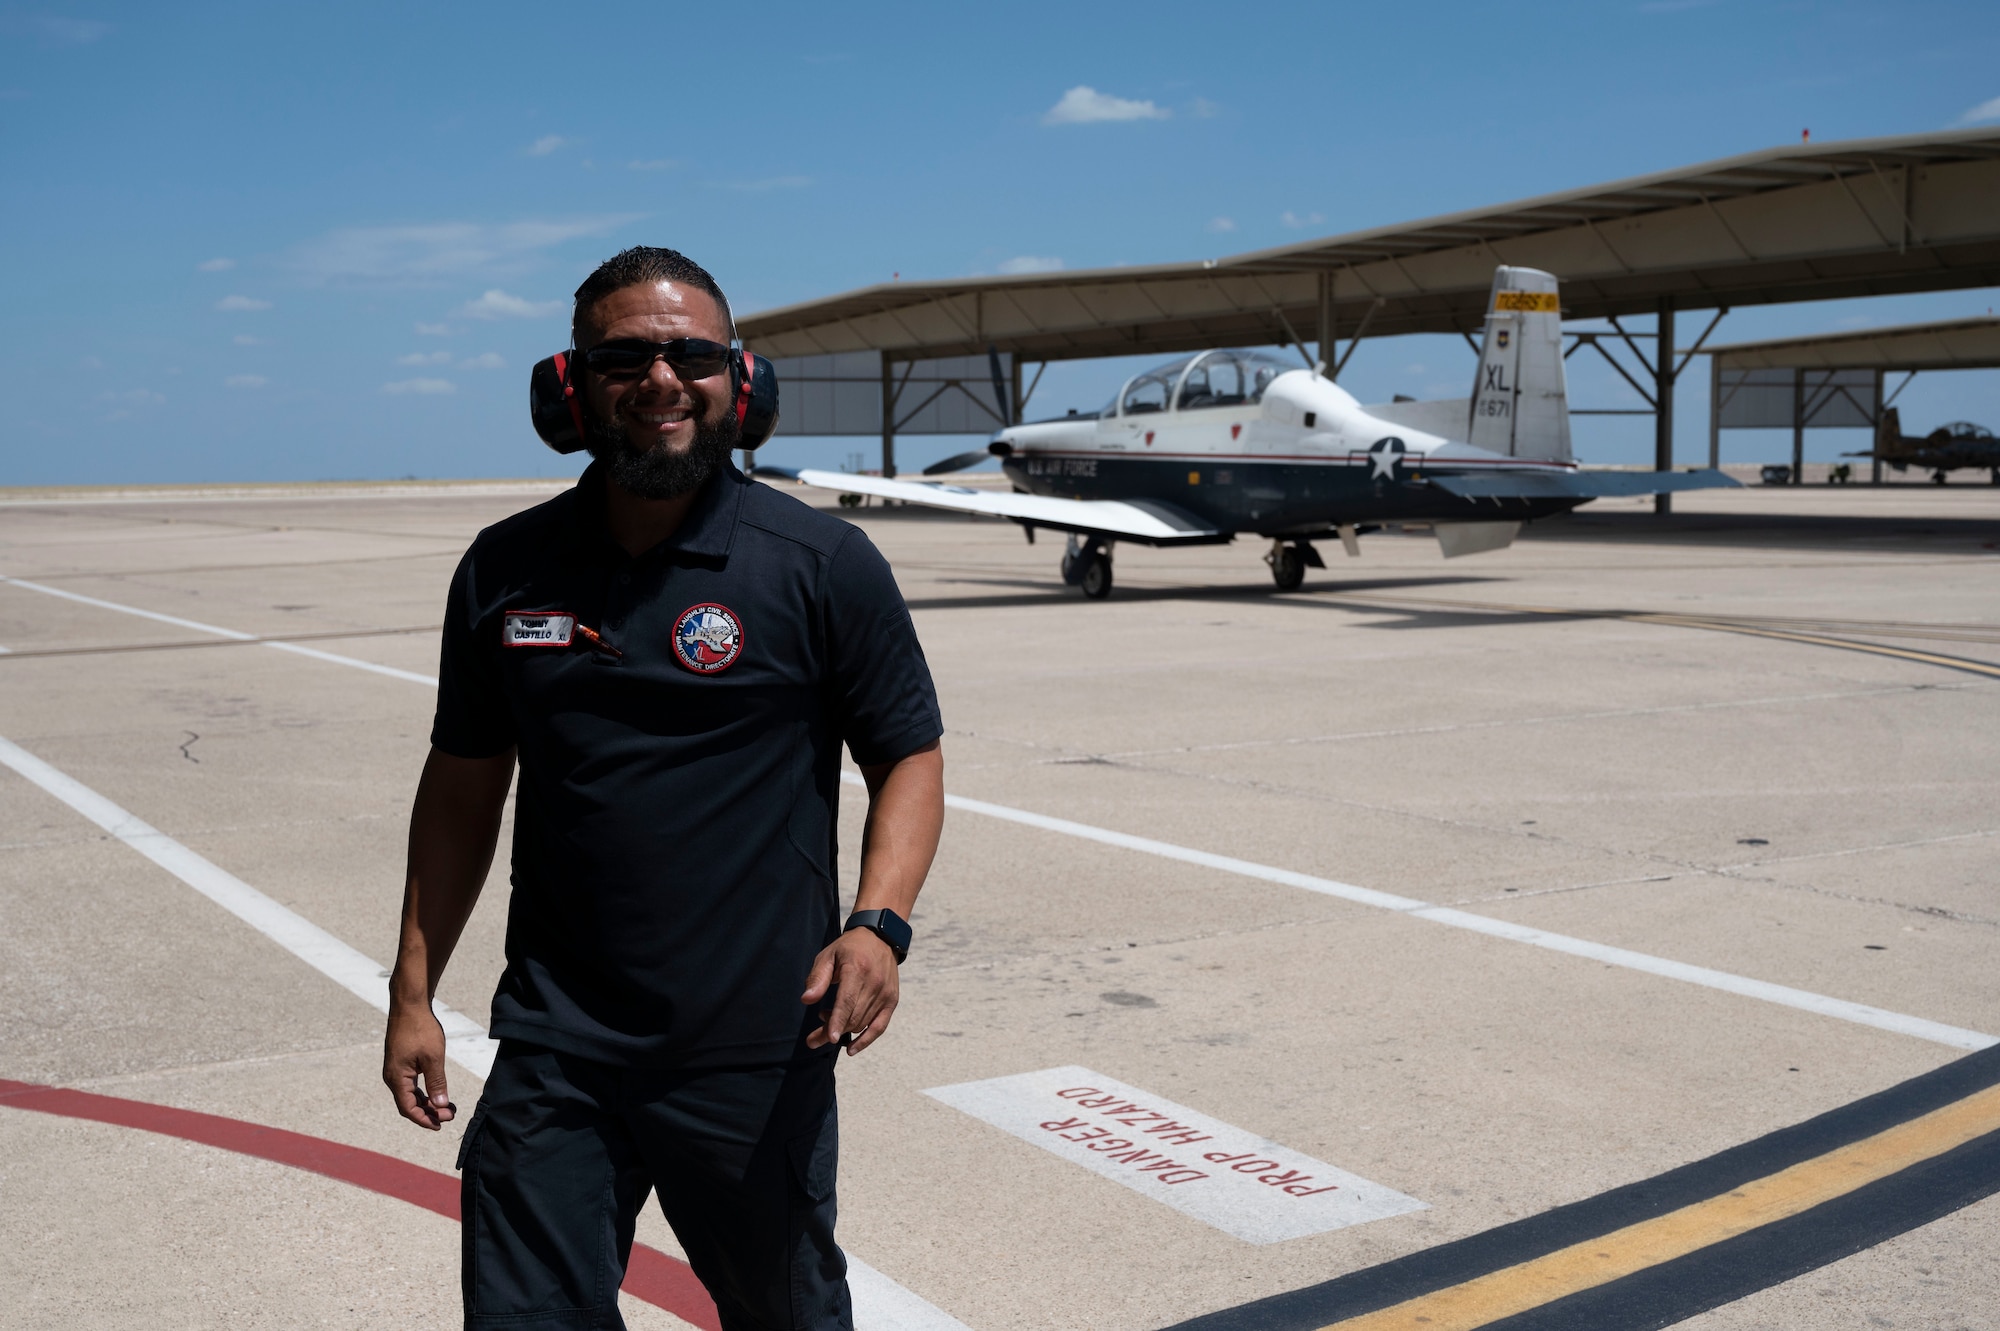 Tommy Castillo, 47th Maintenance Directorate T-6A Texan II crew chief, poses in front of a departing T-6A Texan II on the flight line at Laughlin Air Force Base, Texas, Sept. 11, 2023. Torres is a Del Rio native who works at Laughlin AFB to create the world’s best pilots. (U.S. Air Force photo by Airman 1st Class Kailee Reynolds)